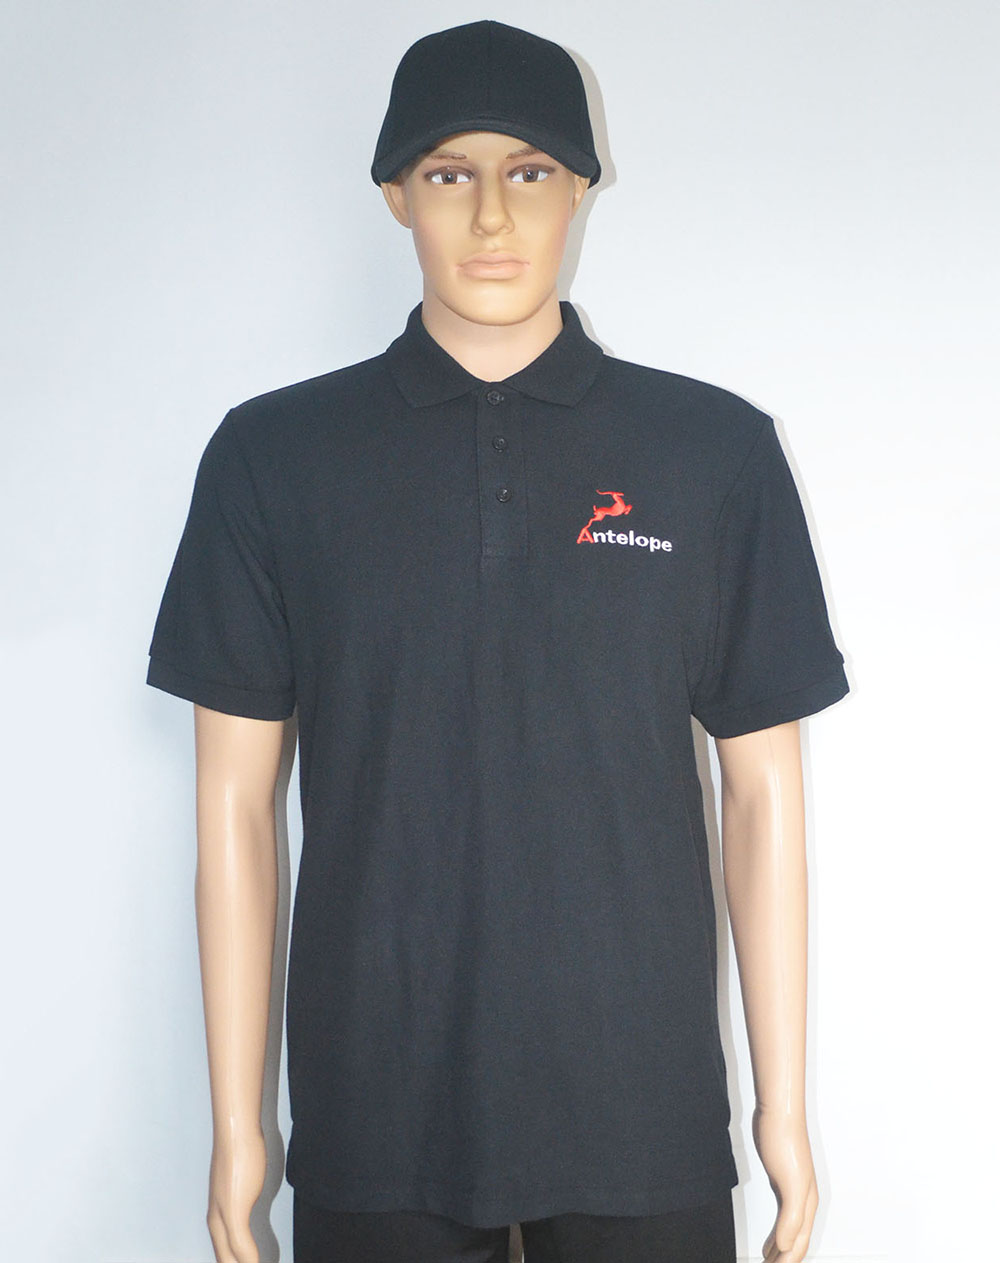 Cotton polo shirts with embroidery logo on left chest, custom company uniforms polo shirts 